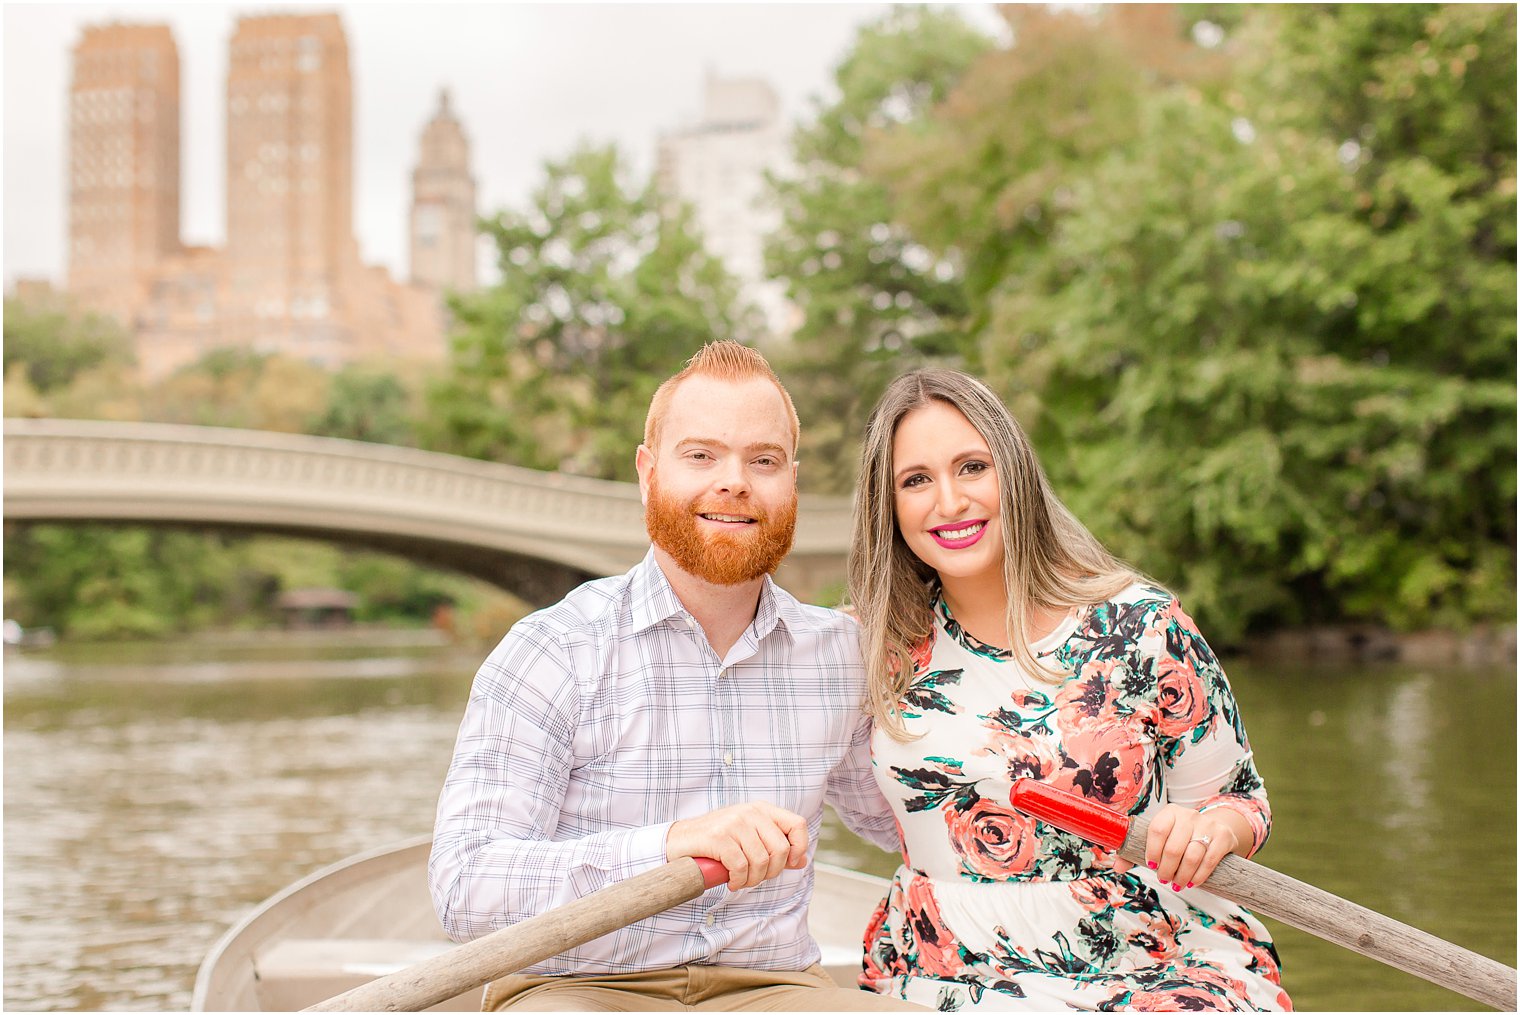 Engagement session at Loeb Boathouse in Central Park